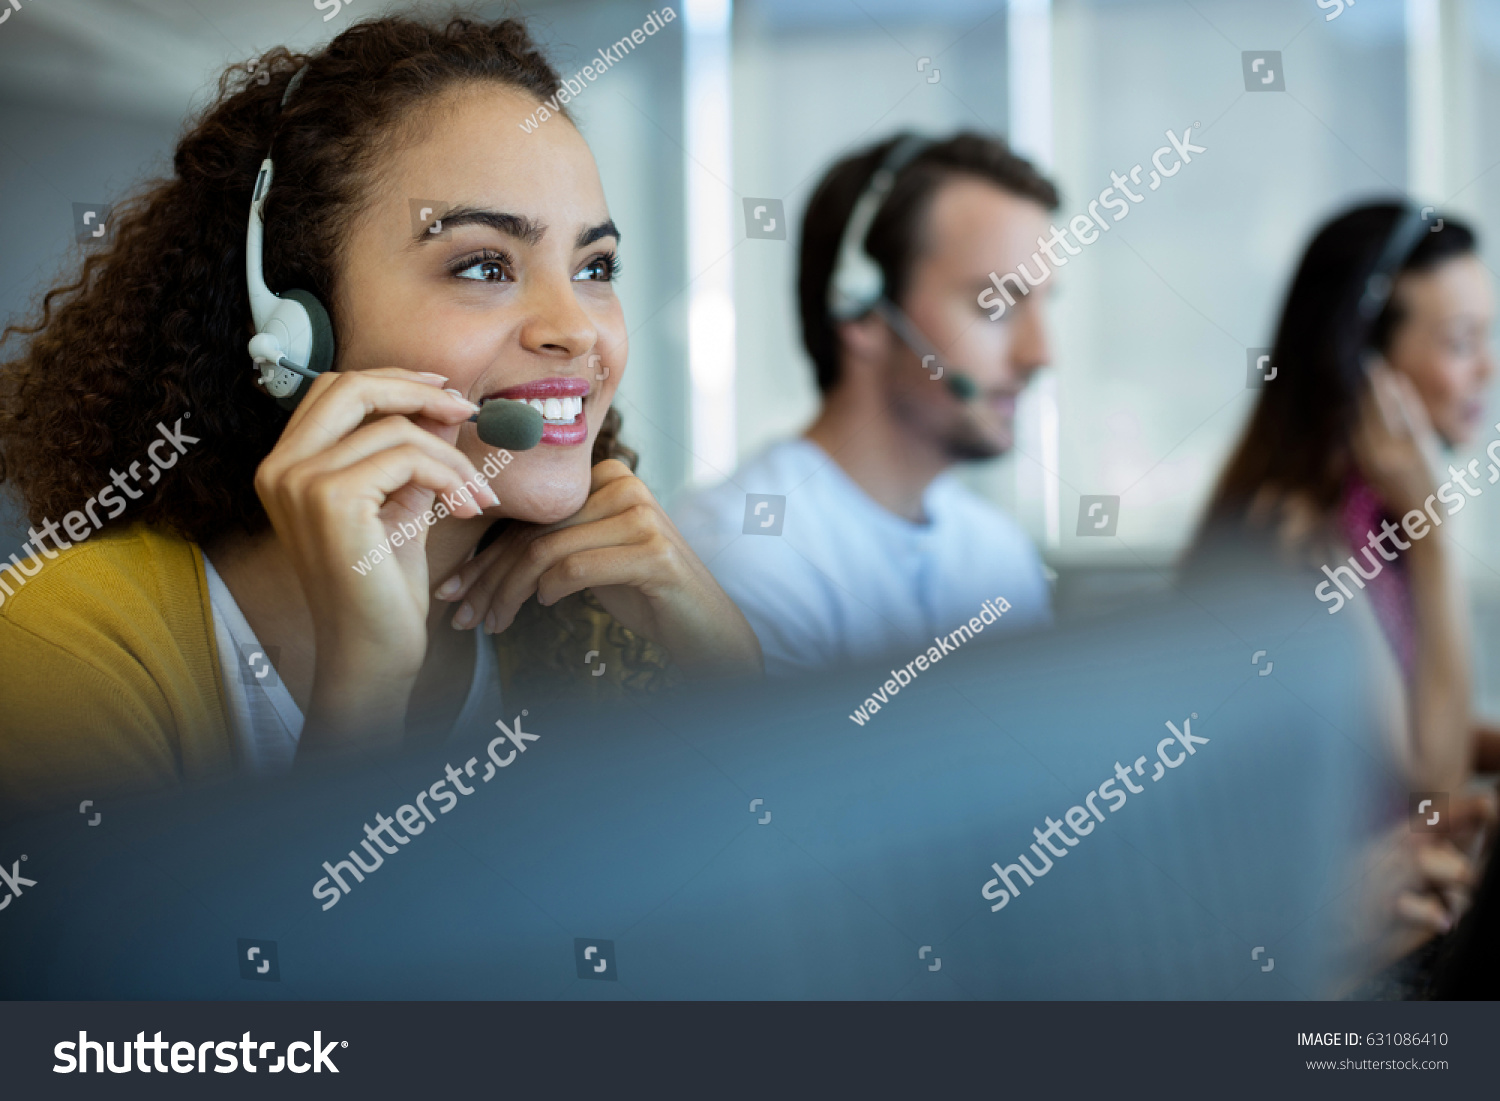 Customer service executive working at office #631086410